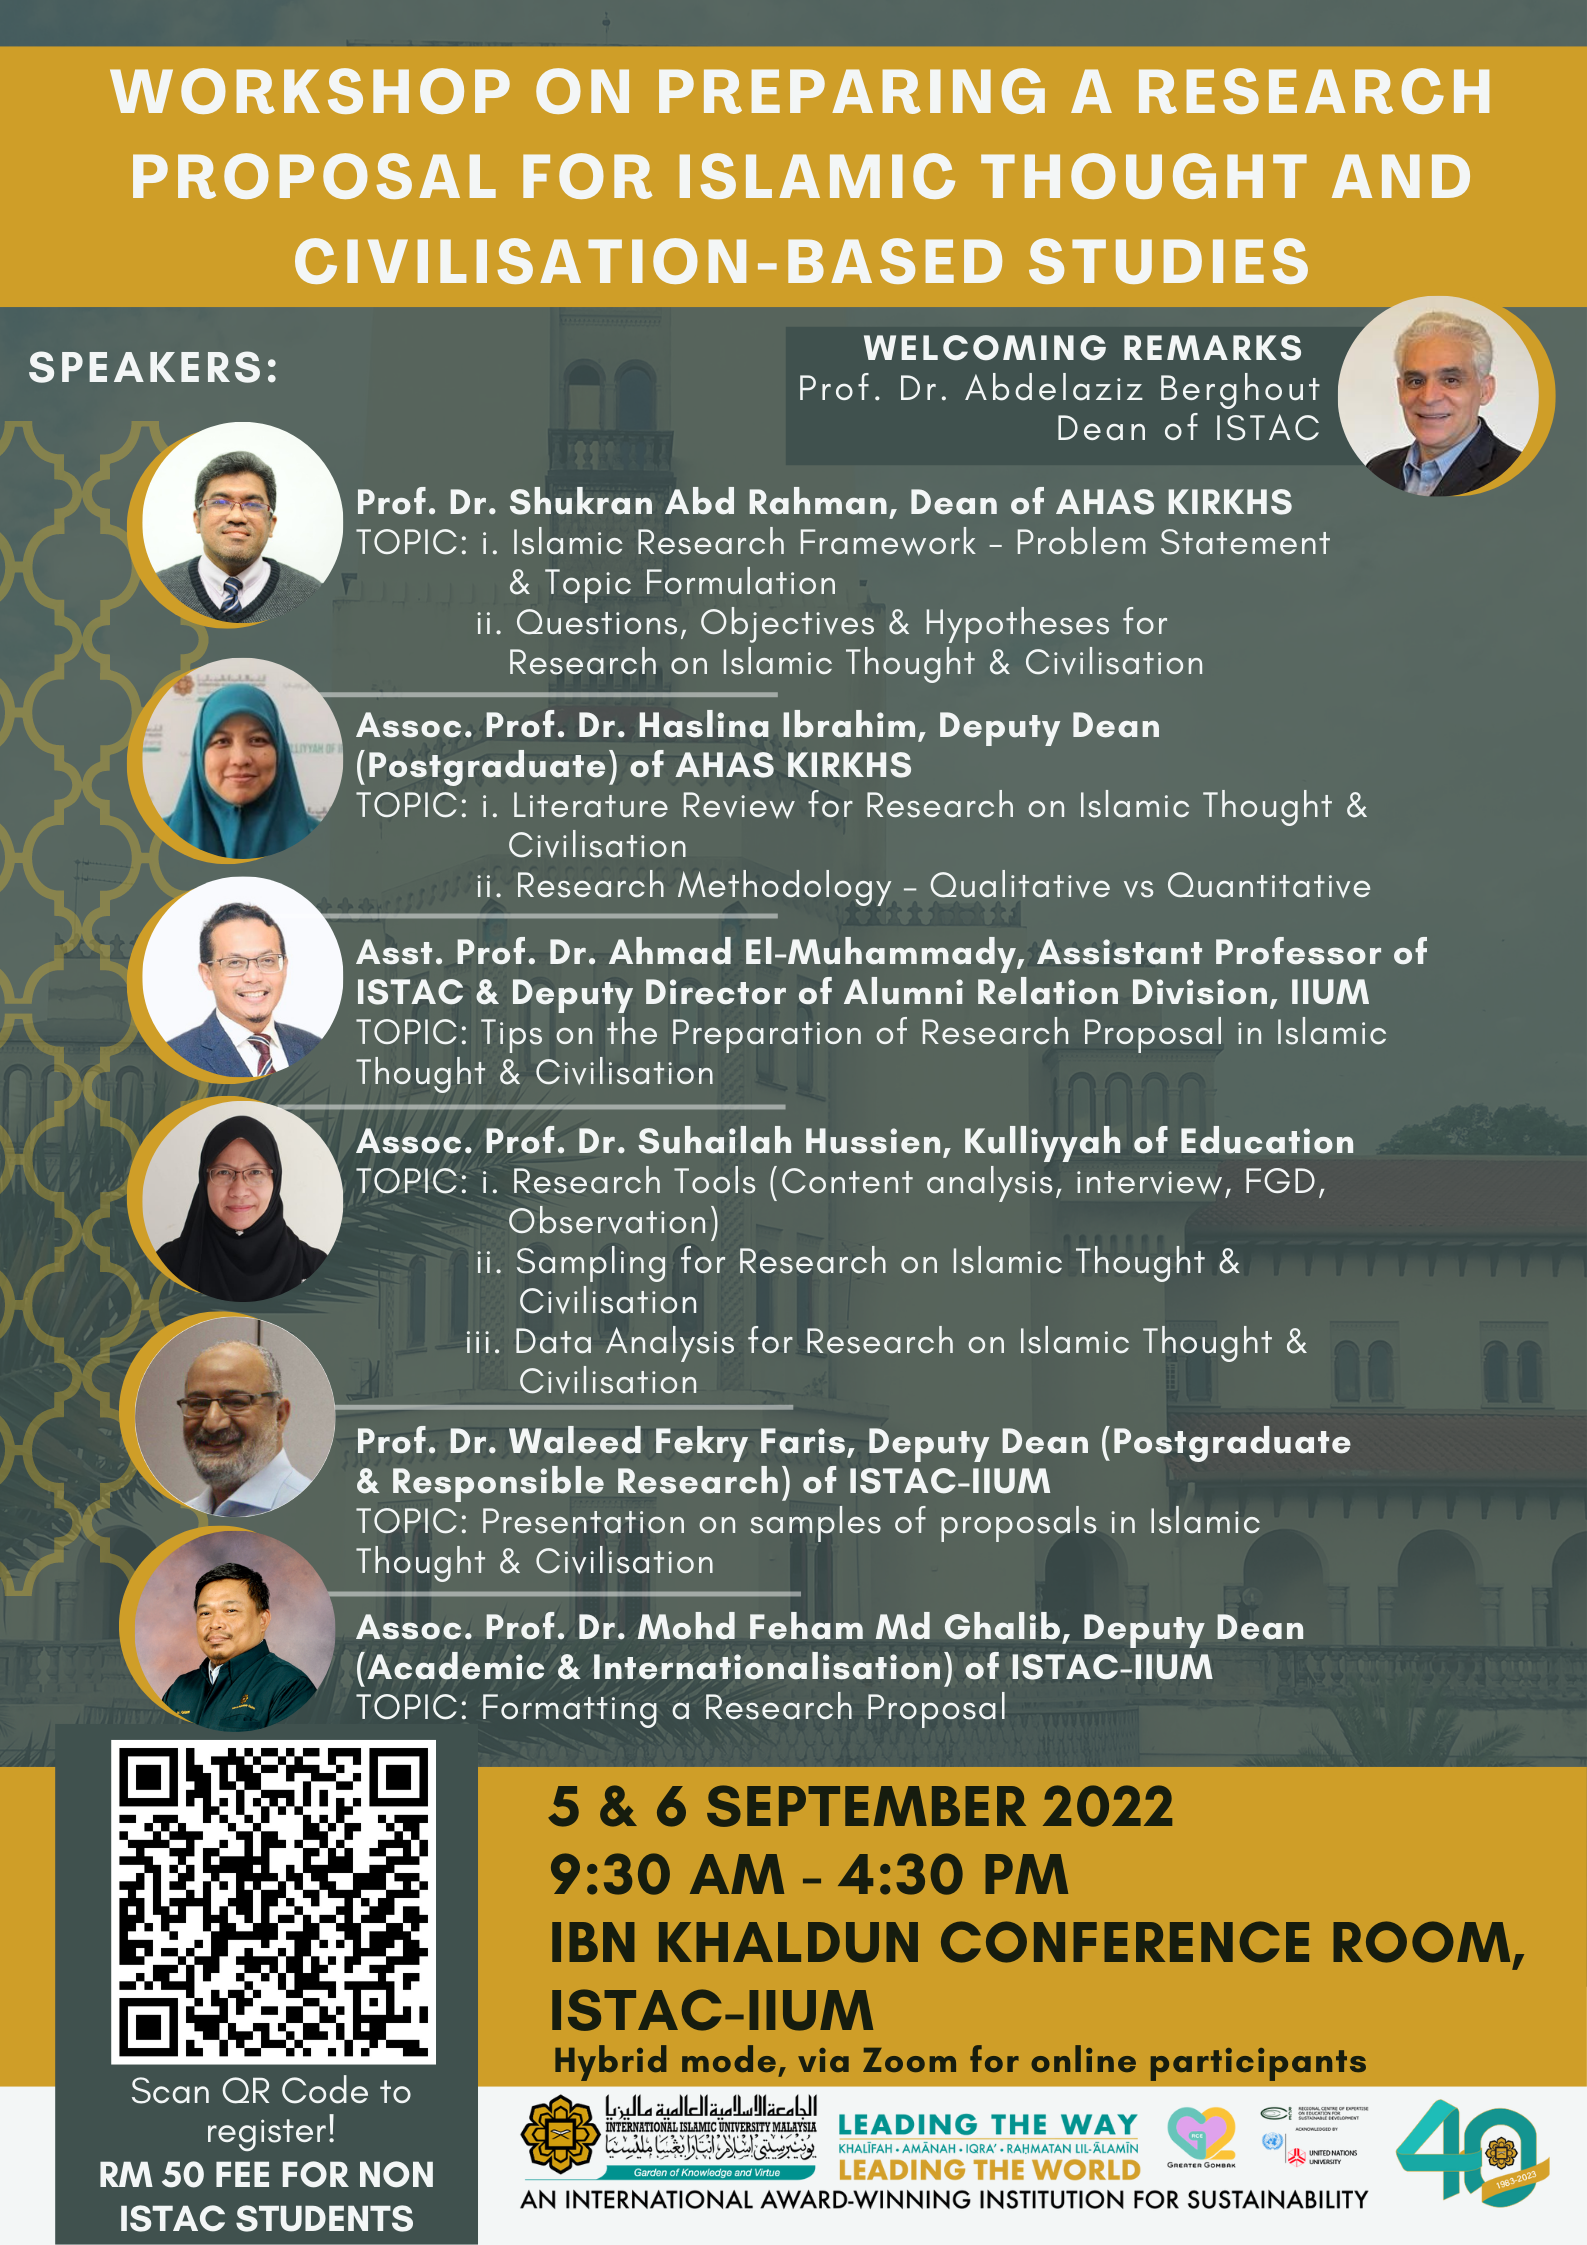 WORKSHOP ON PREPARING A RESEARCH PROPOSAL FOR ISLAMIC THOUGHT AND CIVILISATION-BASED STUDIES